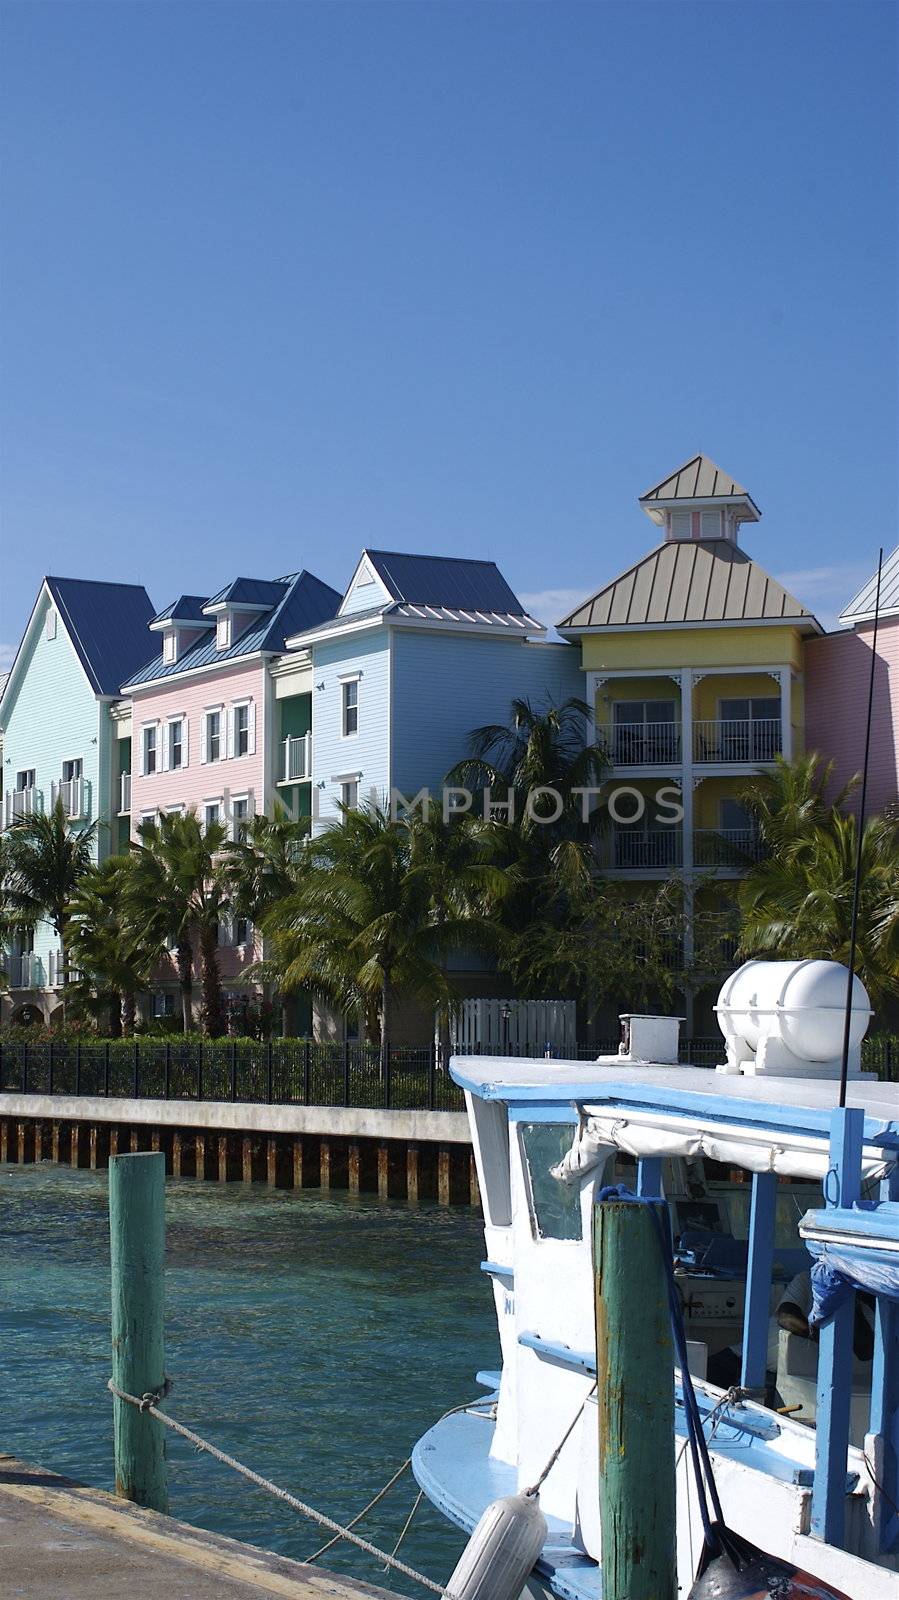 Taken from the ferry port in Nassau along the ocean side, featuring multicoloured houses against a blue sky